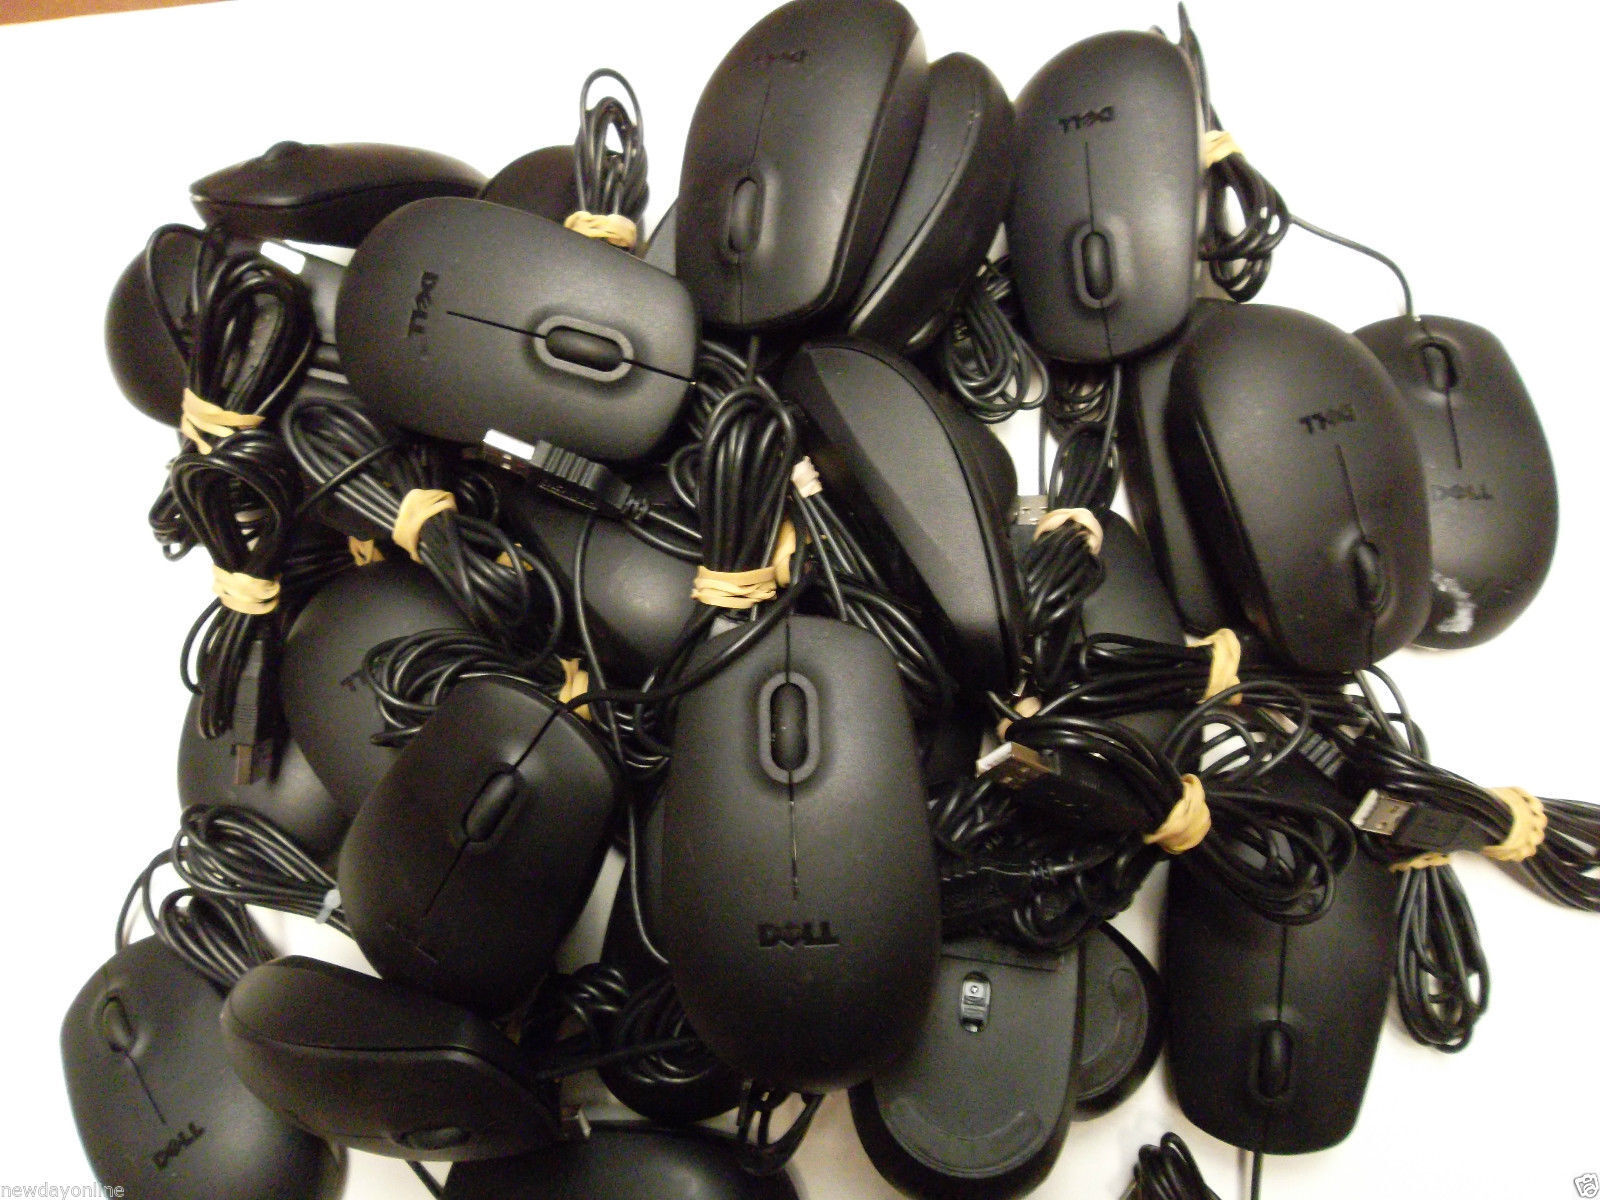 LOT-20 Dell Black Optical 2-Button Mouse w/Scroll Wheel 9RRC7 5Y2RG 11D3V RGR5X